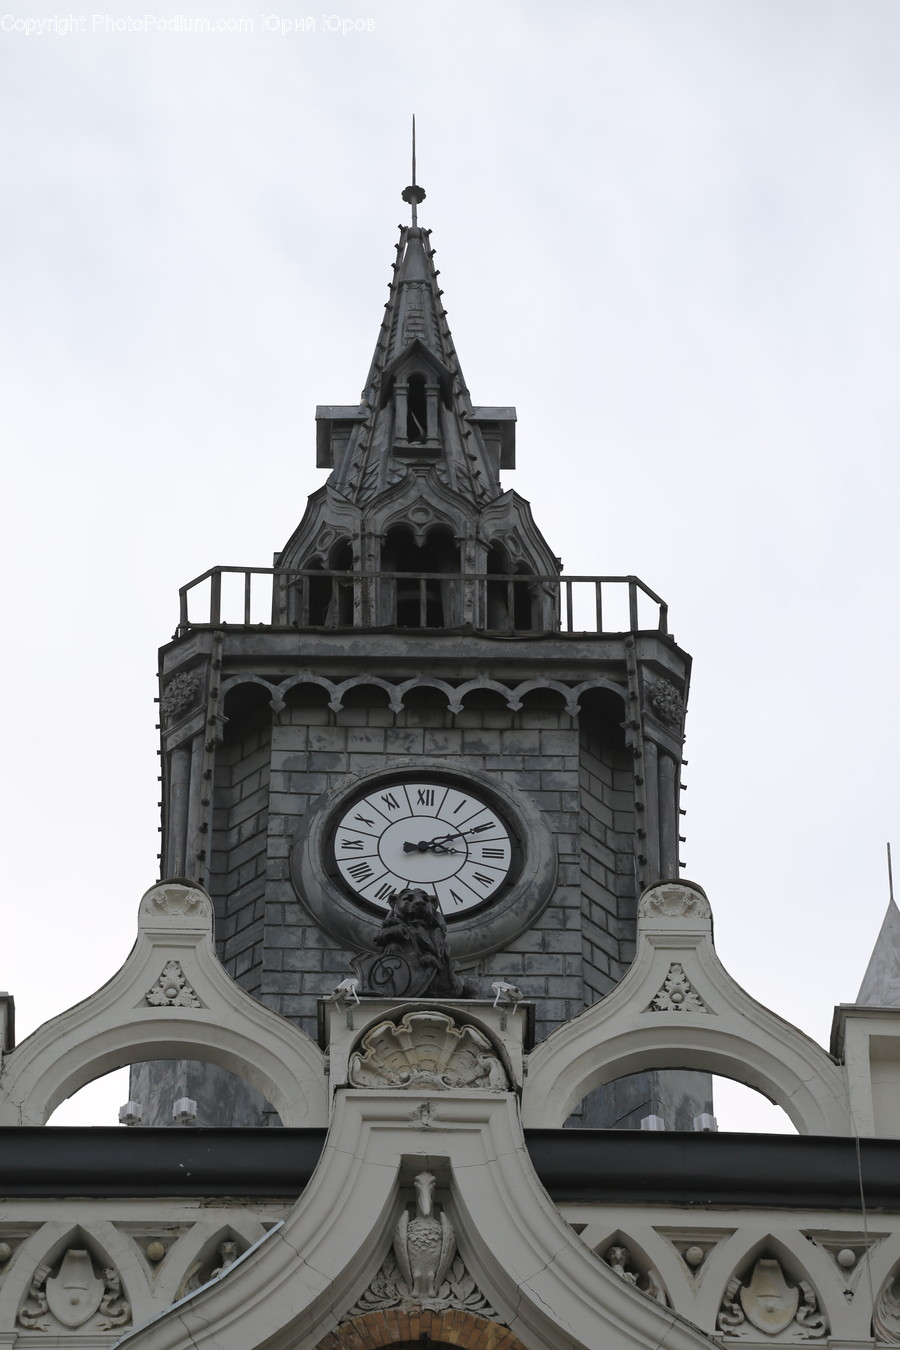 Architecture, Building, Tower, Clock Tower, Clock